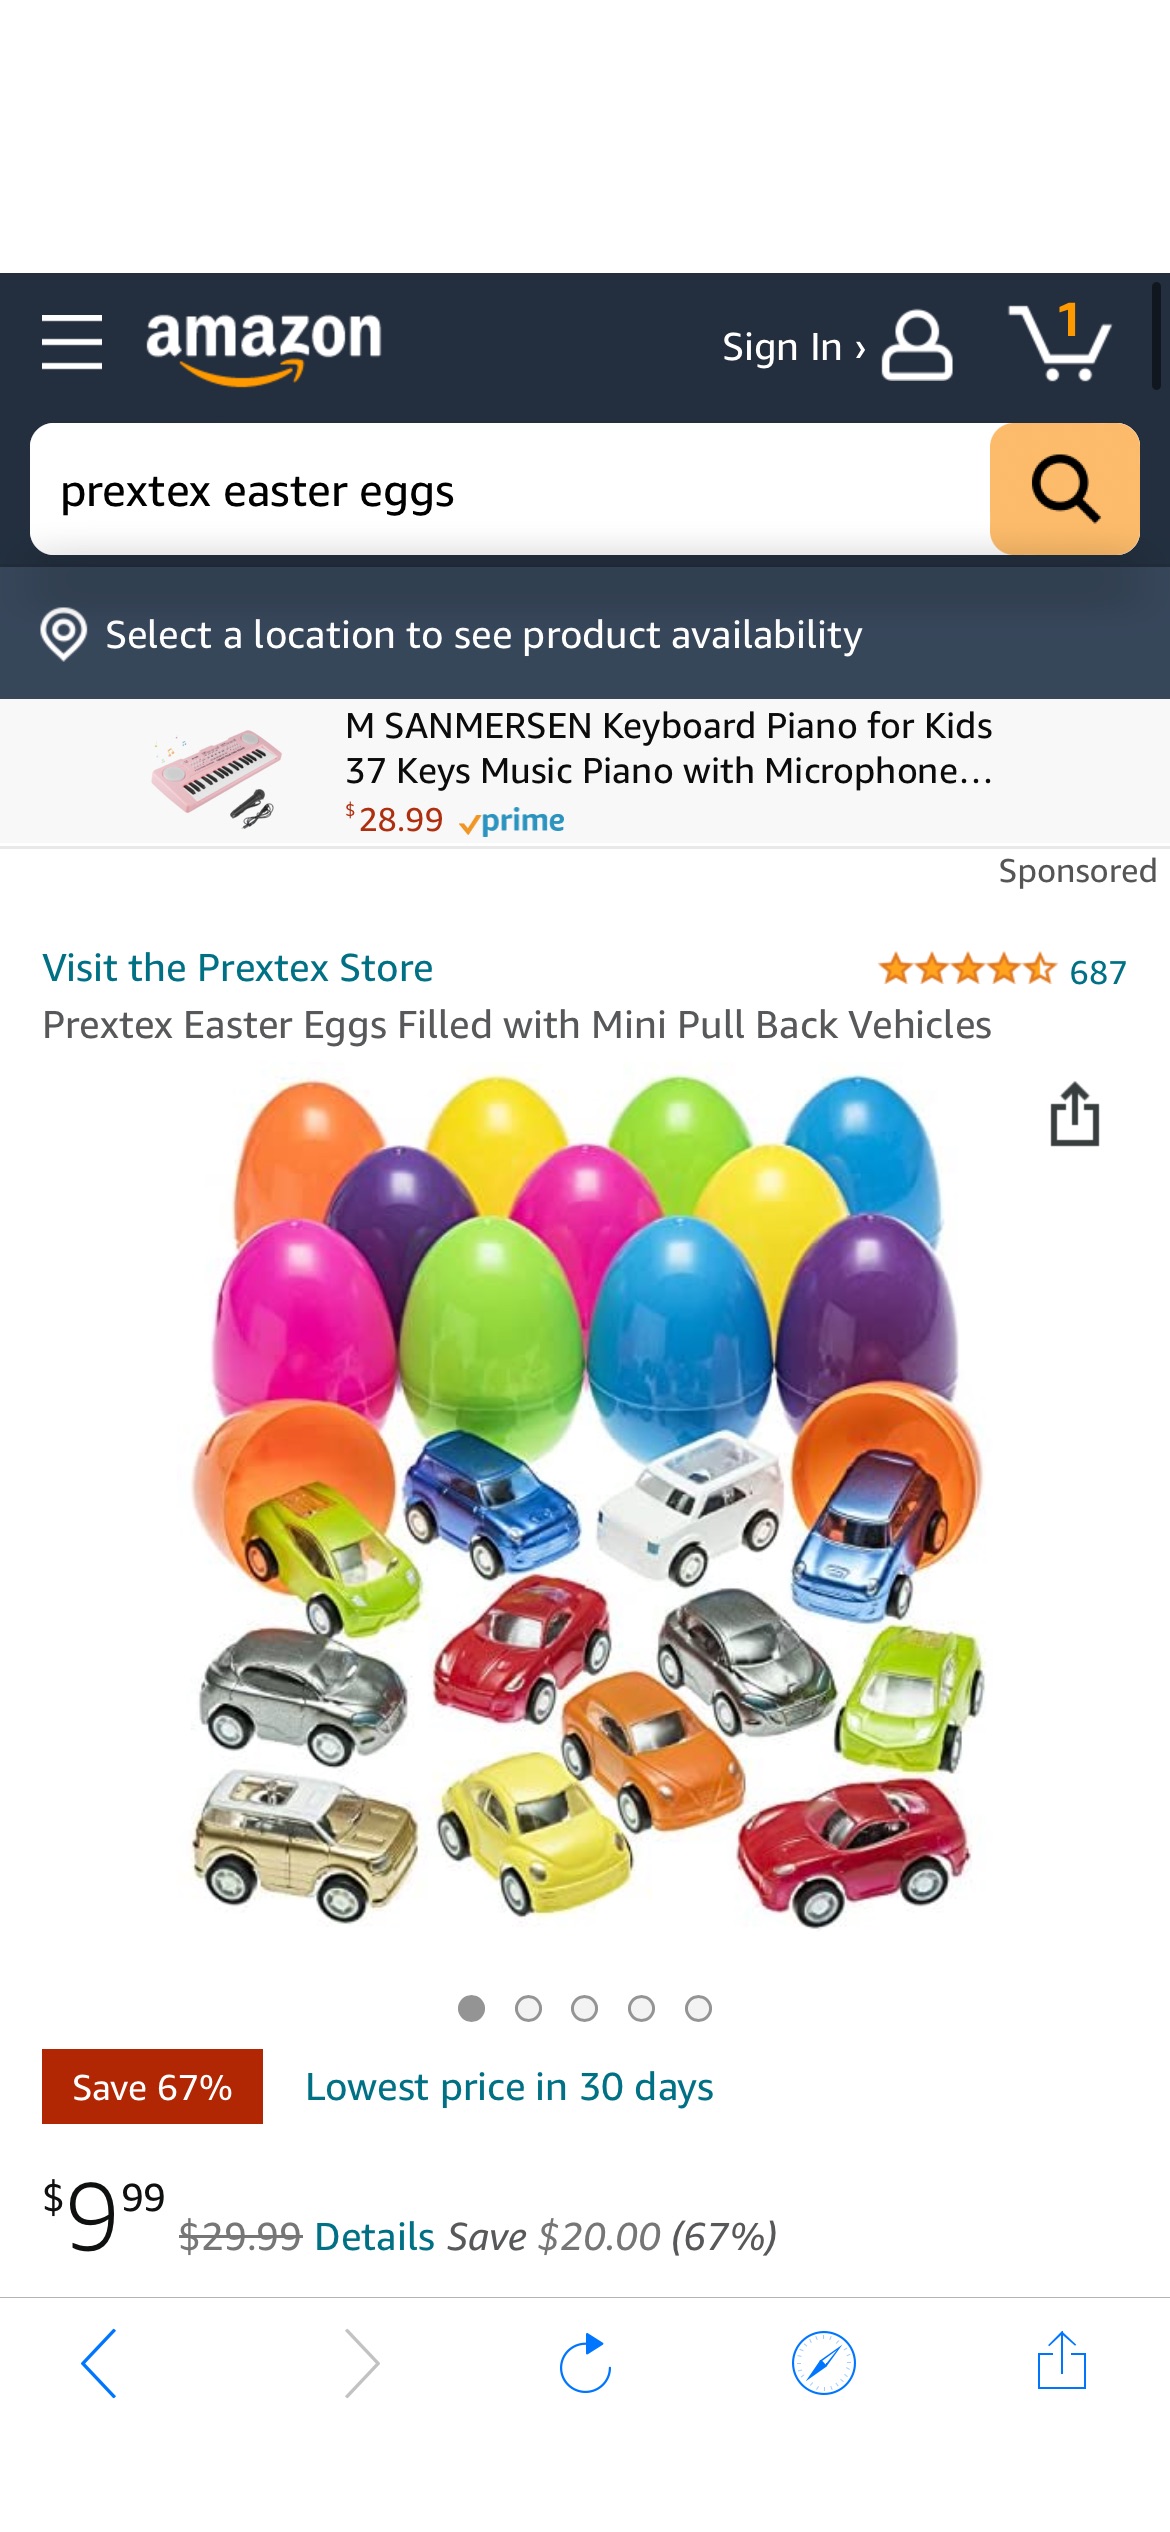 Amazon.com: Prextex Easter Eggs Filled with Mini Pull Back Vehicles : Toys & Games12颗复活节彩蛋汽车玩具